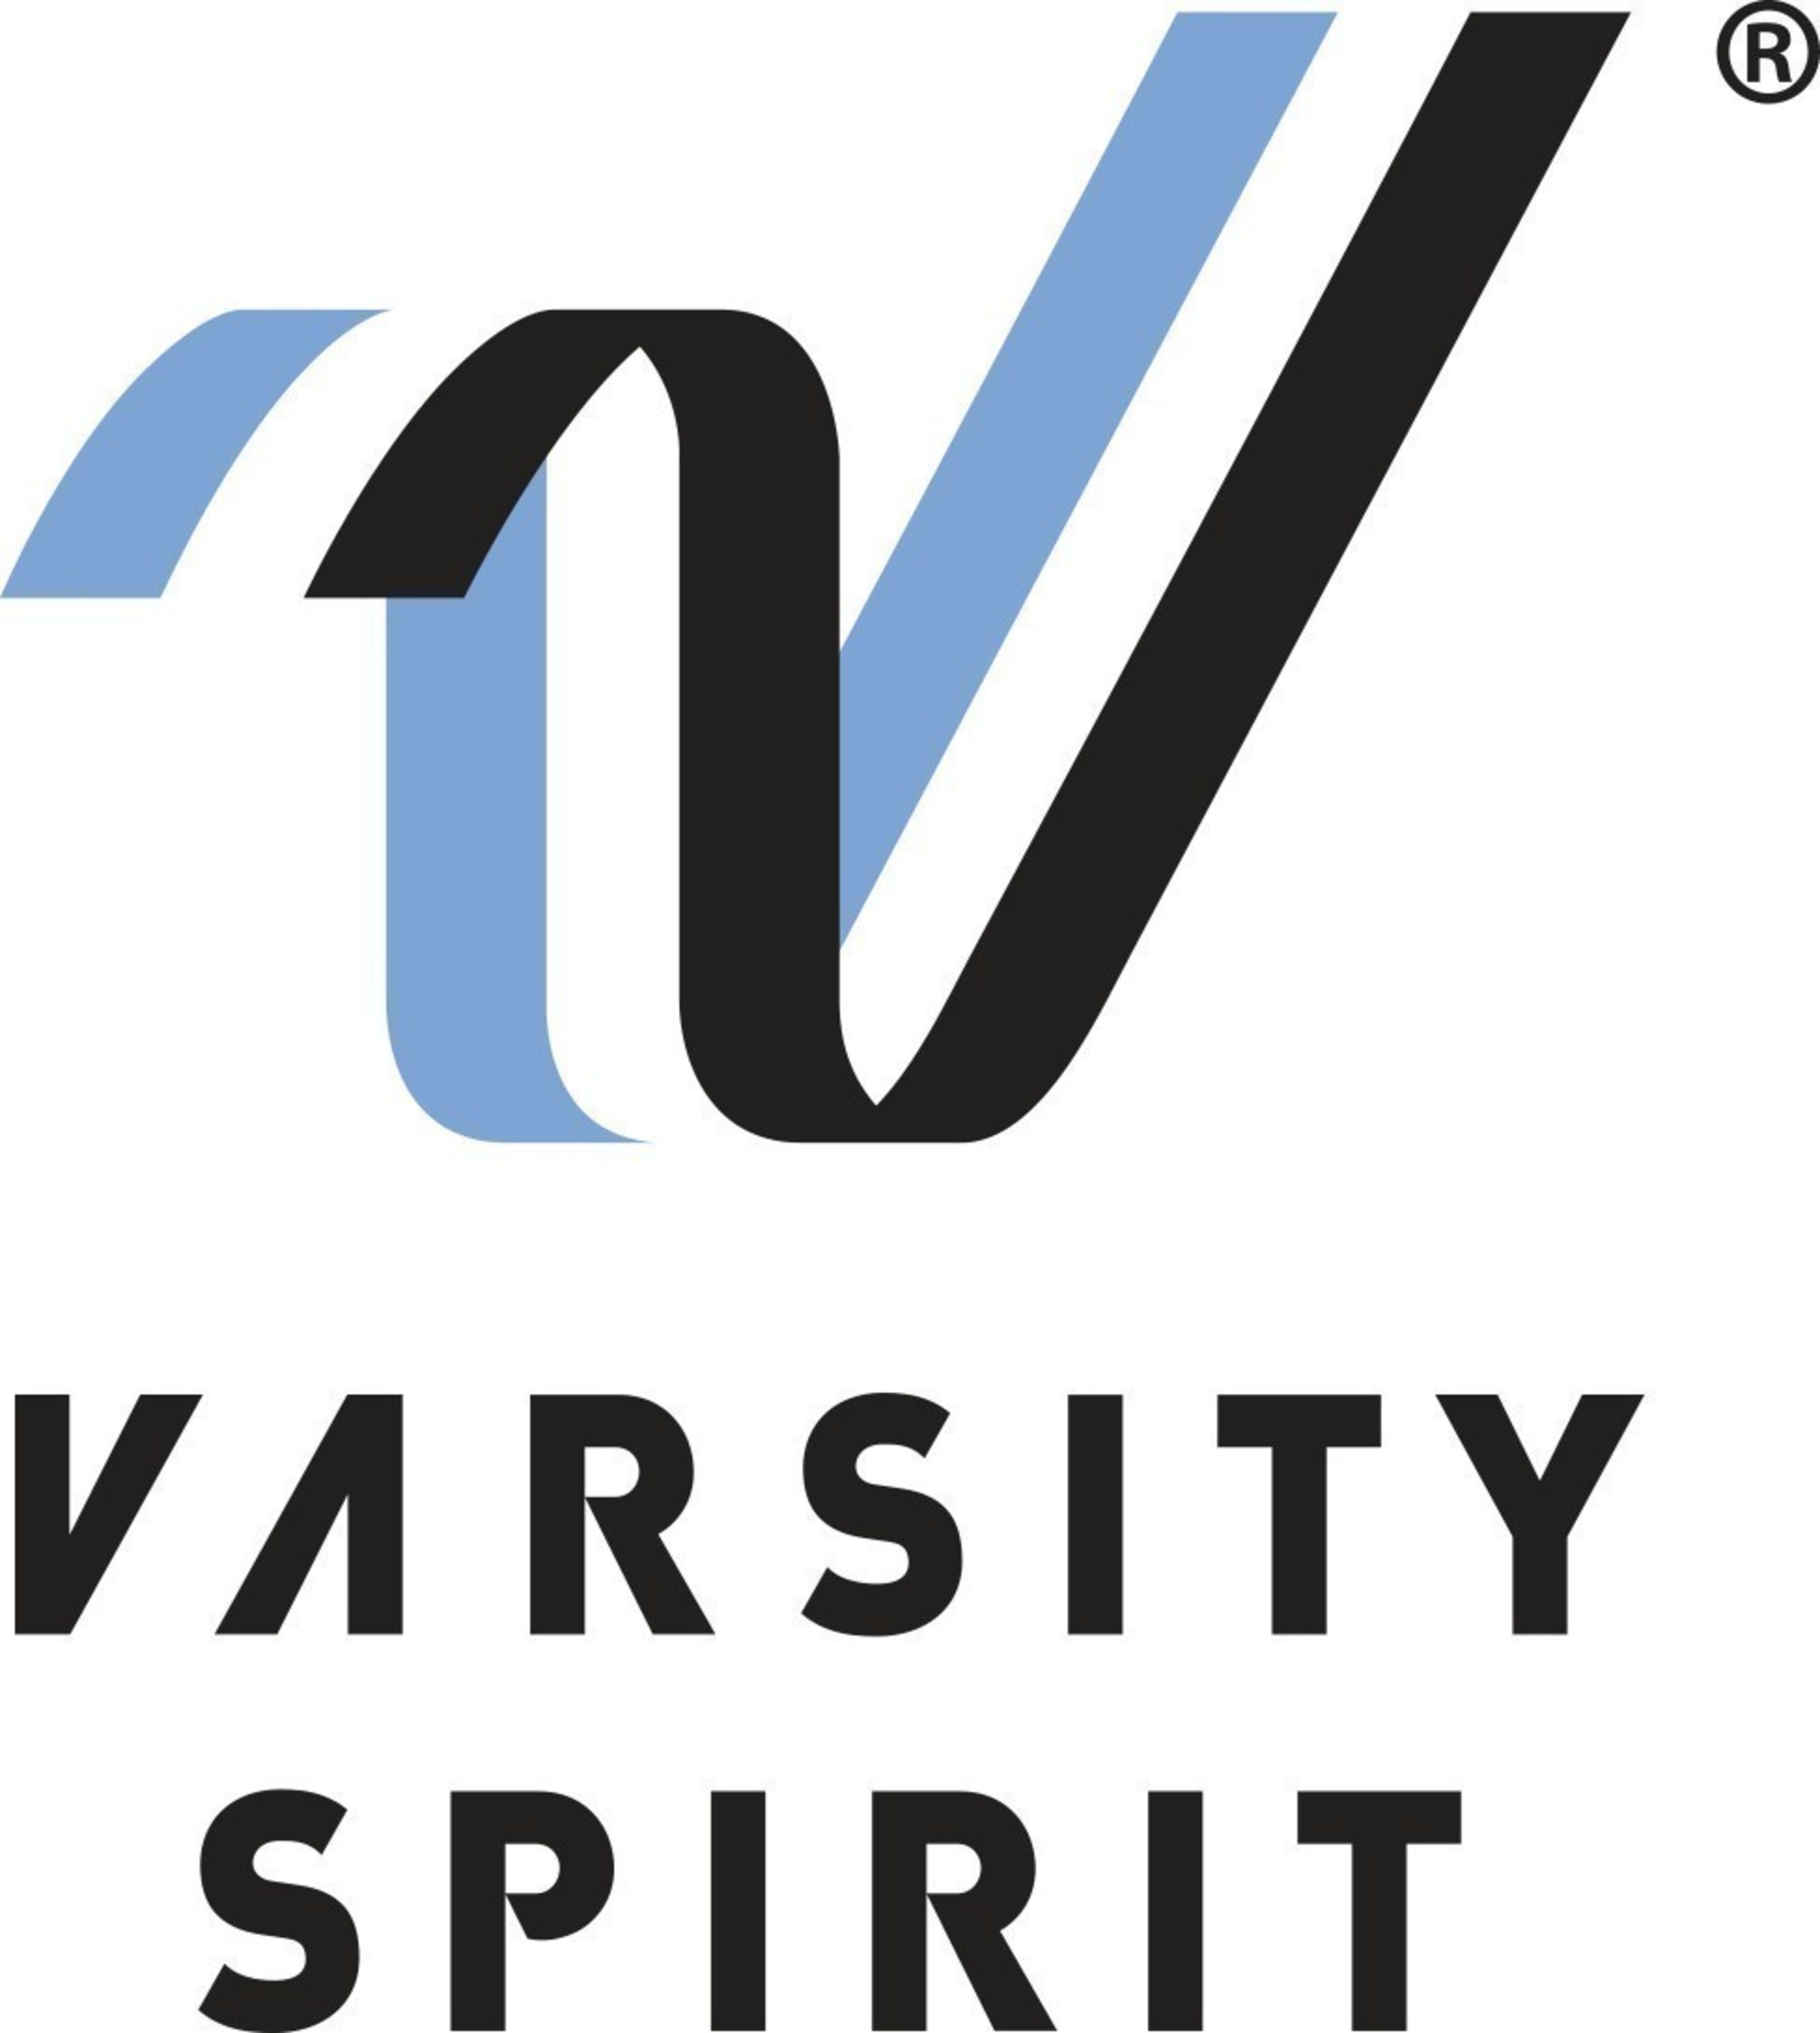 Varsity Memphis-based Varsity Spirit has been a driving force behind cheerleading's dynamic transformation into the high-energy, athletic activity it is today, and the leading global source for all things cheerleading and dance. A division of Varsity Brands, Varsity Spirit is a leader in uniform innovation and educational camps, clinics and competitions, of which more than 350,000 cheerleaders and dancers attend each year. Focused on safety, entertainment and traditional school leadership...